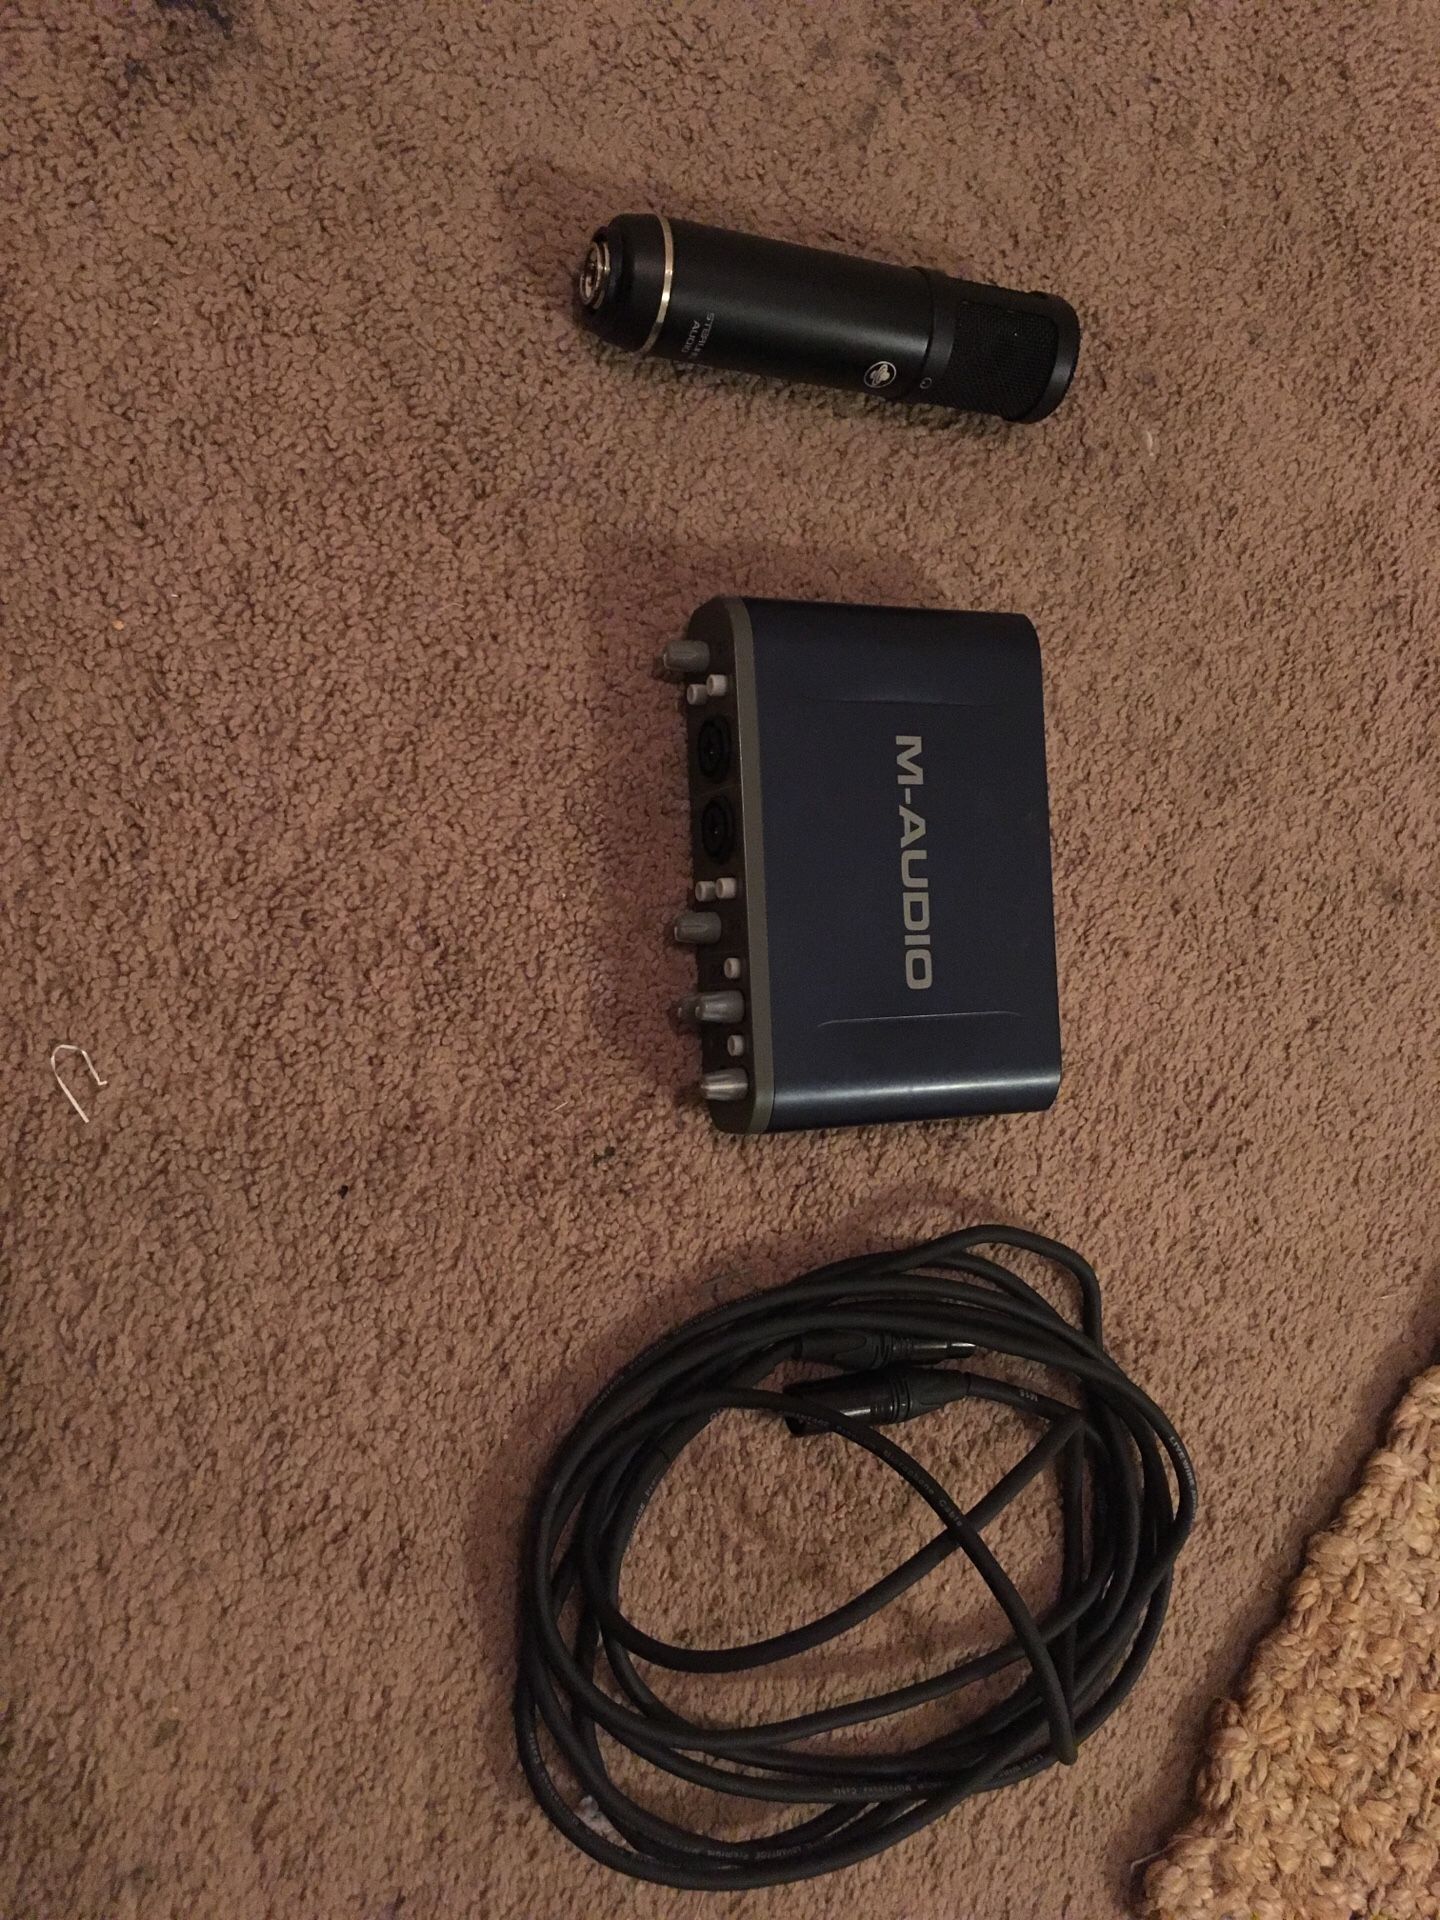 M-Audio fast track pro condenser and Sterling Audio mic